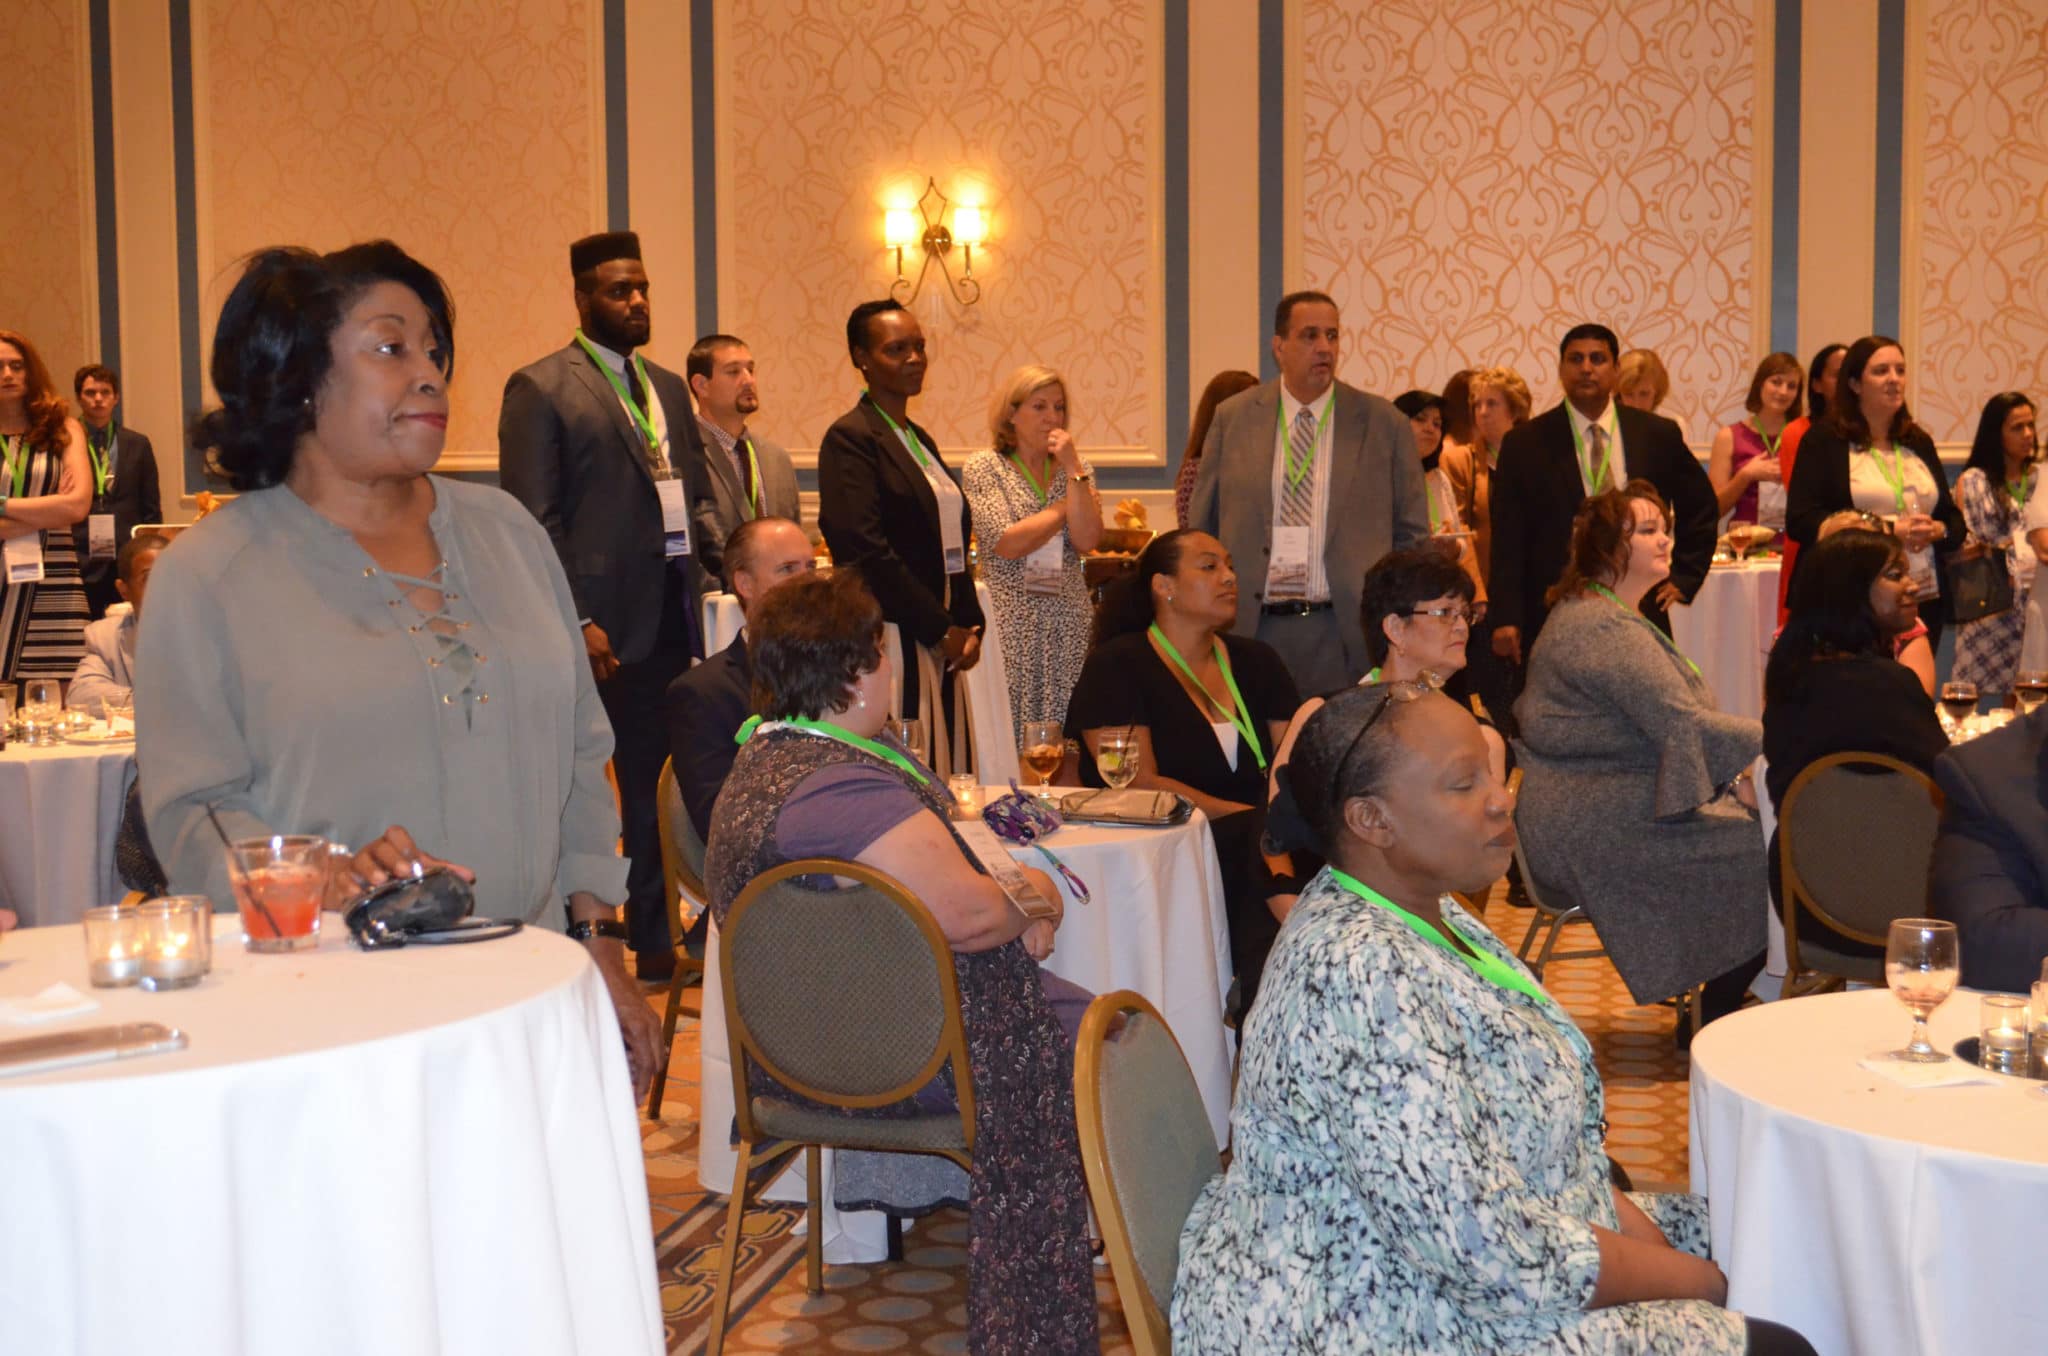 On September 24-27, 2017 Community Options hosted its 11th Annual iMatter Conference A Meaningful Life: Conference on Supported Employment at the Francis Marion Hotel in Charleston, SC. The Welcome Reception was Sunday, September 24th @ 6:00 pm at Francis Marion Hotel - Carolina A Ballroom (Mezzanine Level).